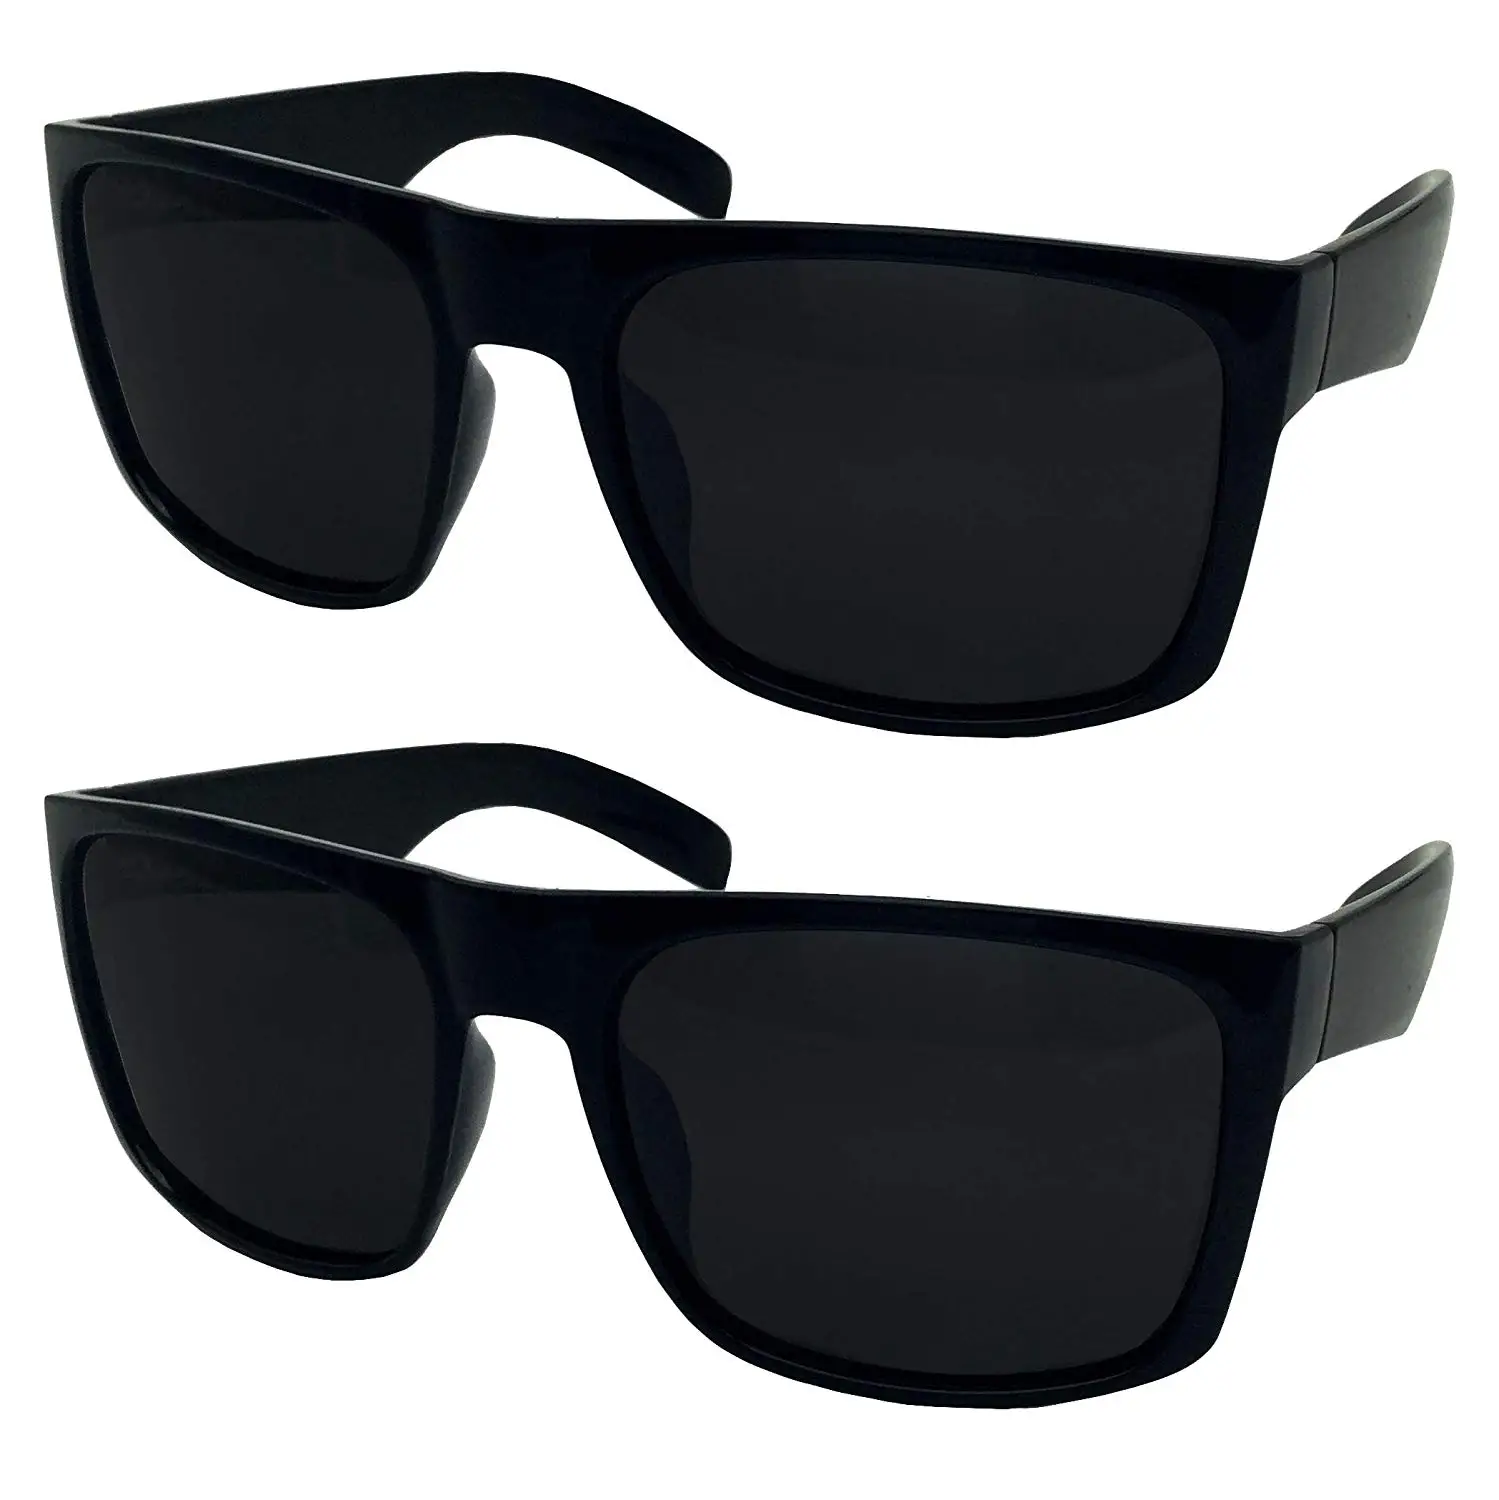 Buy 2 Pack XL Polarized Mens Big Wide Frame Sunglasses - Large Head Fit ...